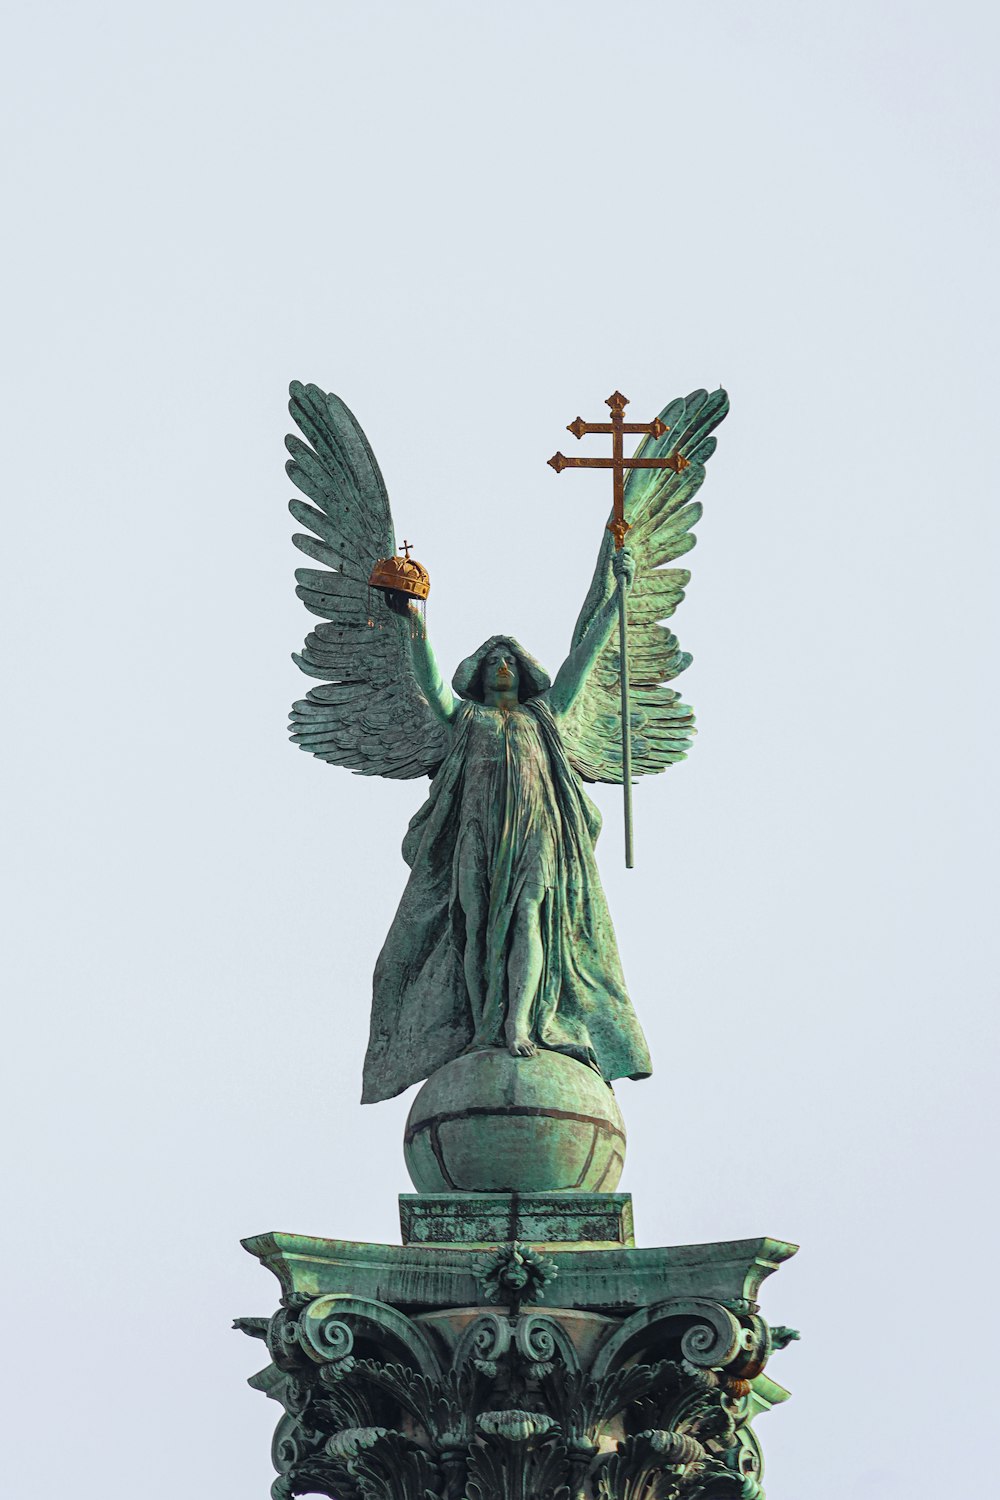 a statue of an angel holding a cross on top of a building